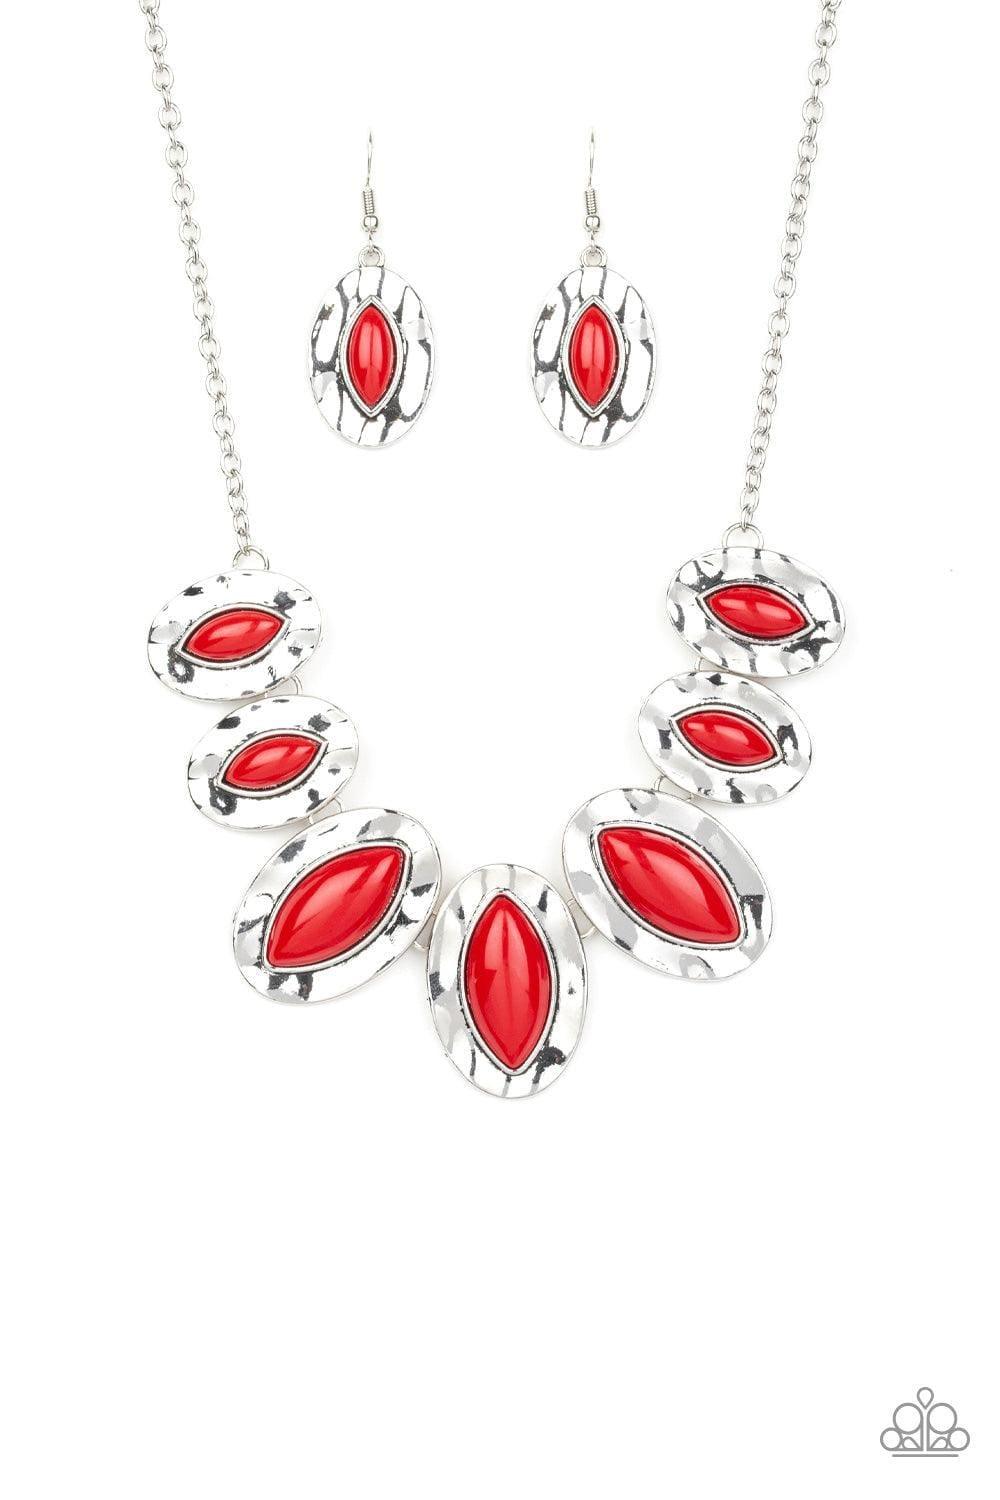 Paparazzi Accessories - Terra Color - Red Necklace - Bling by JessieK